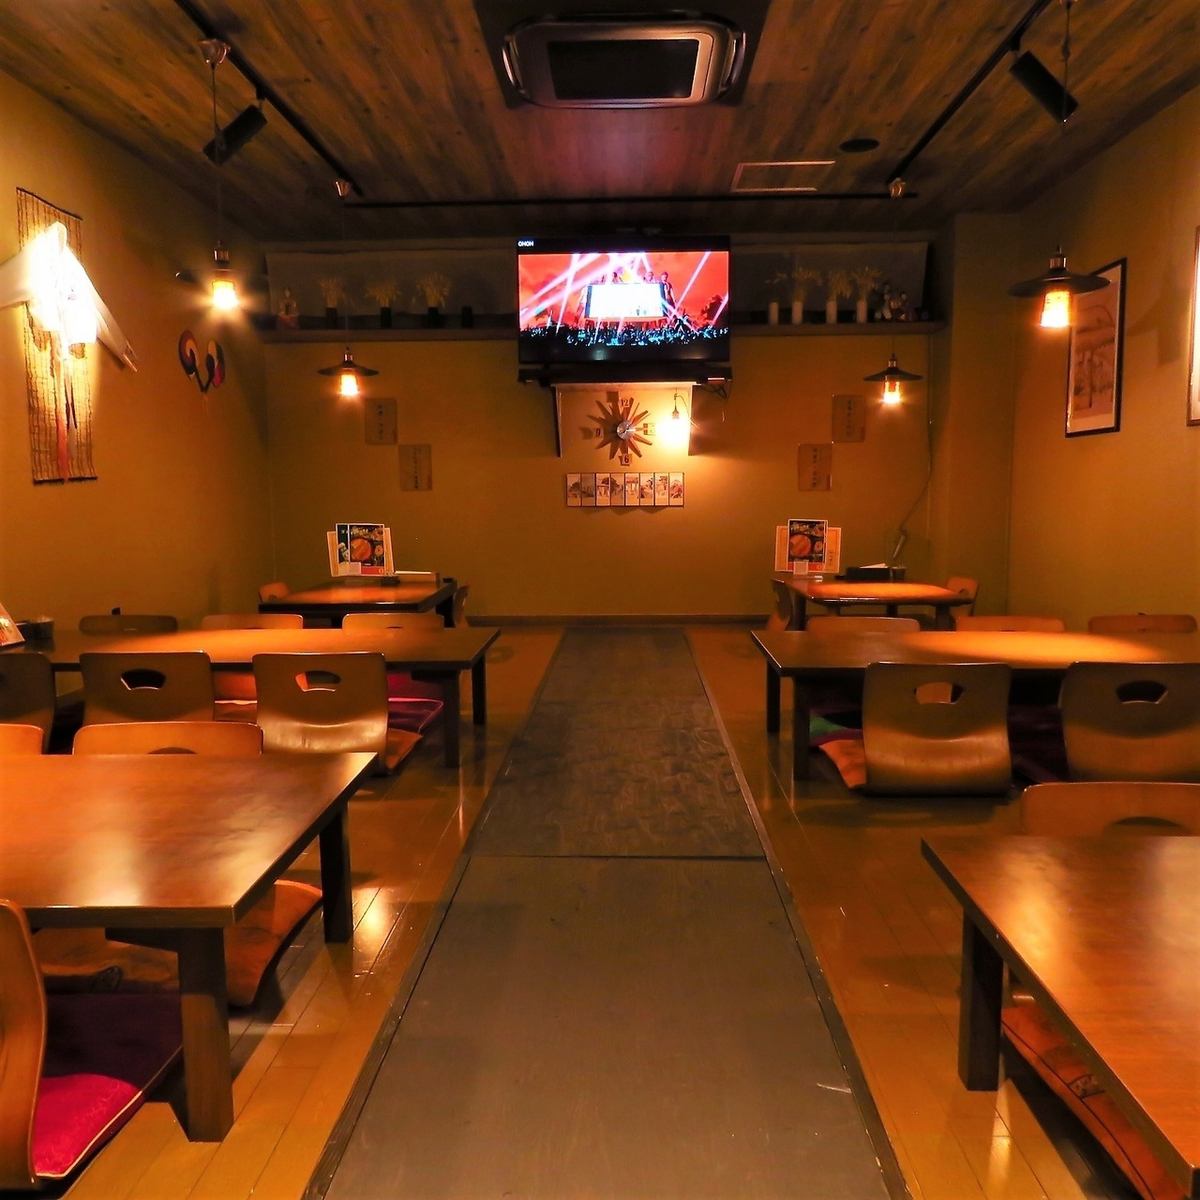 We have a private room that can be reserved for private use! Perfect for parties!